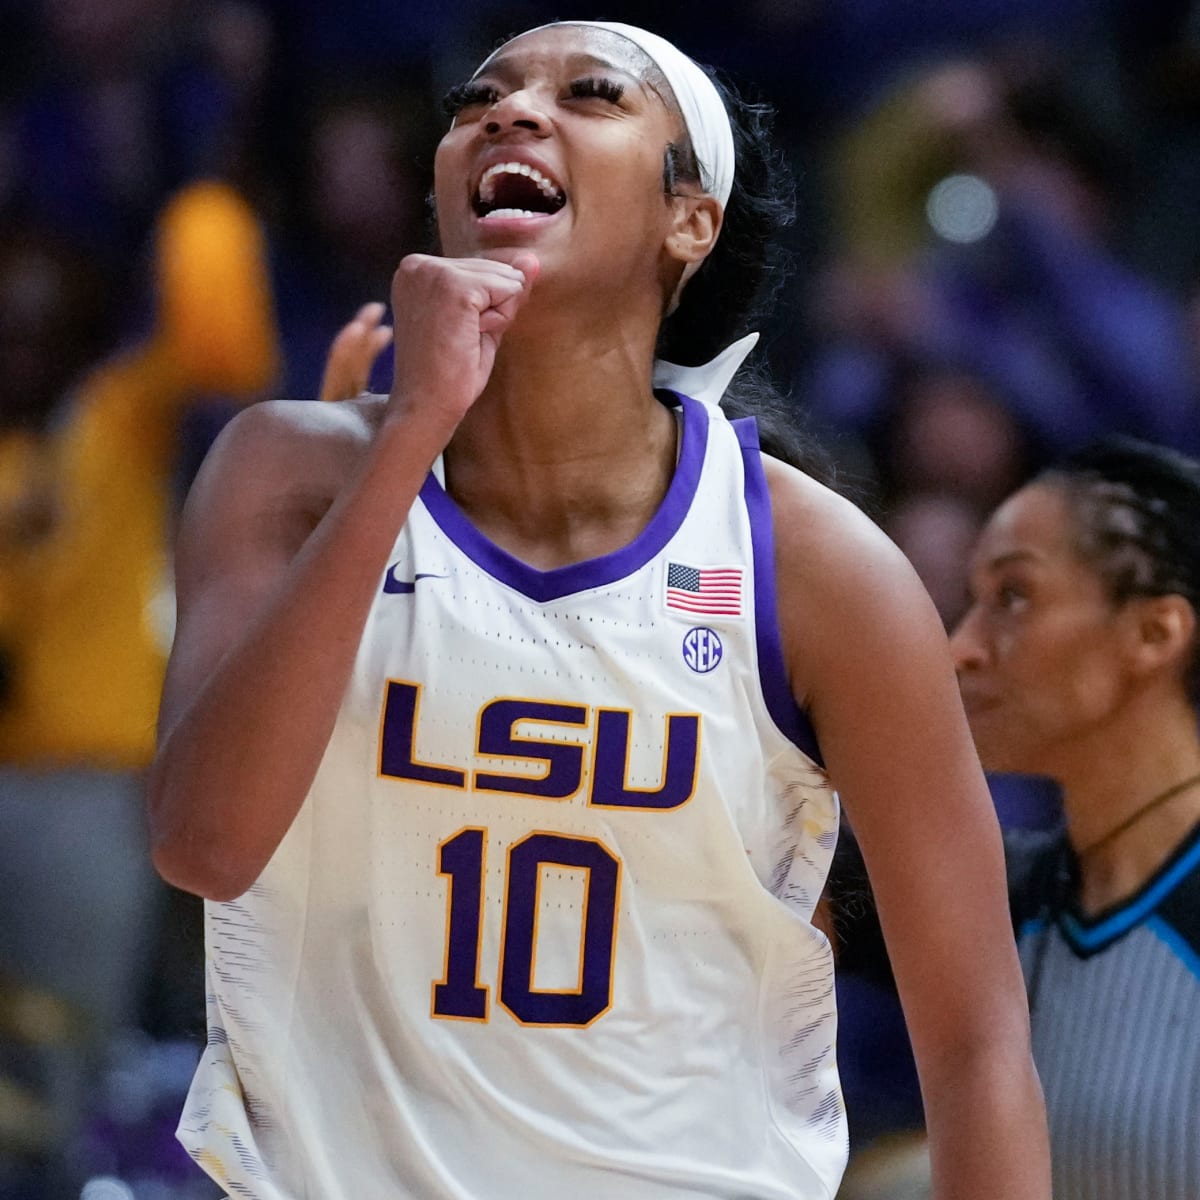 LSU star Angel Reese has been unstoppable under Kim Mulkey